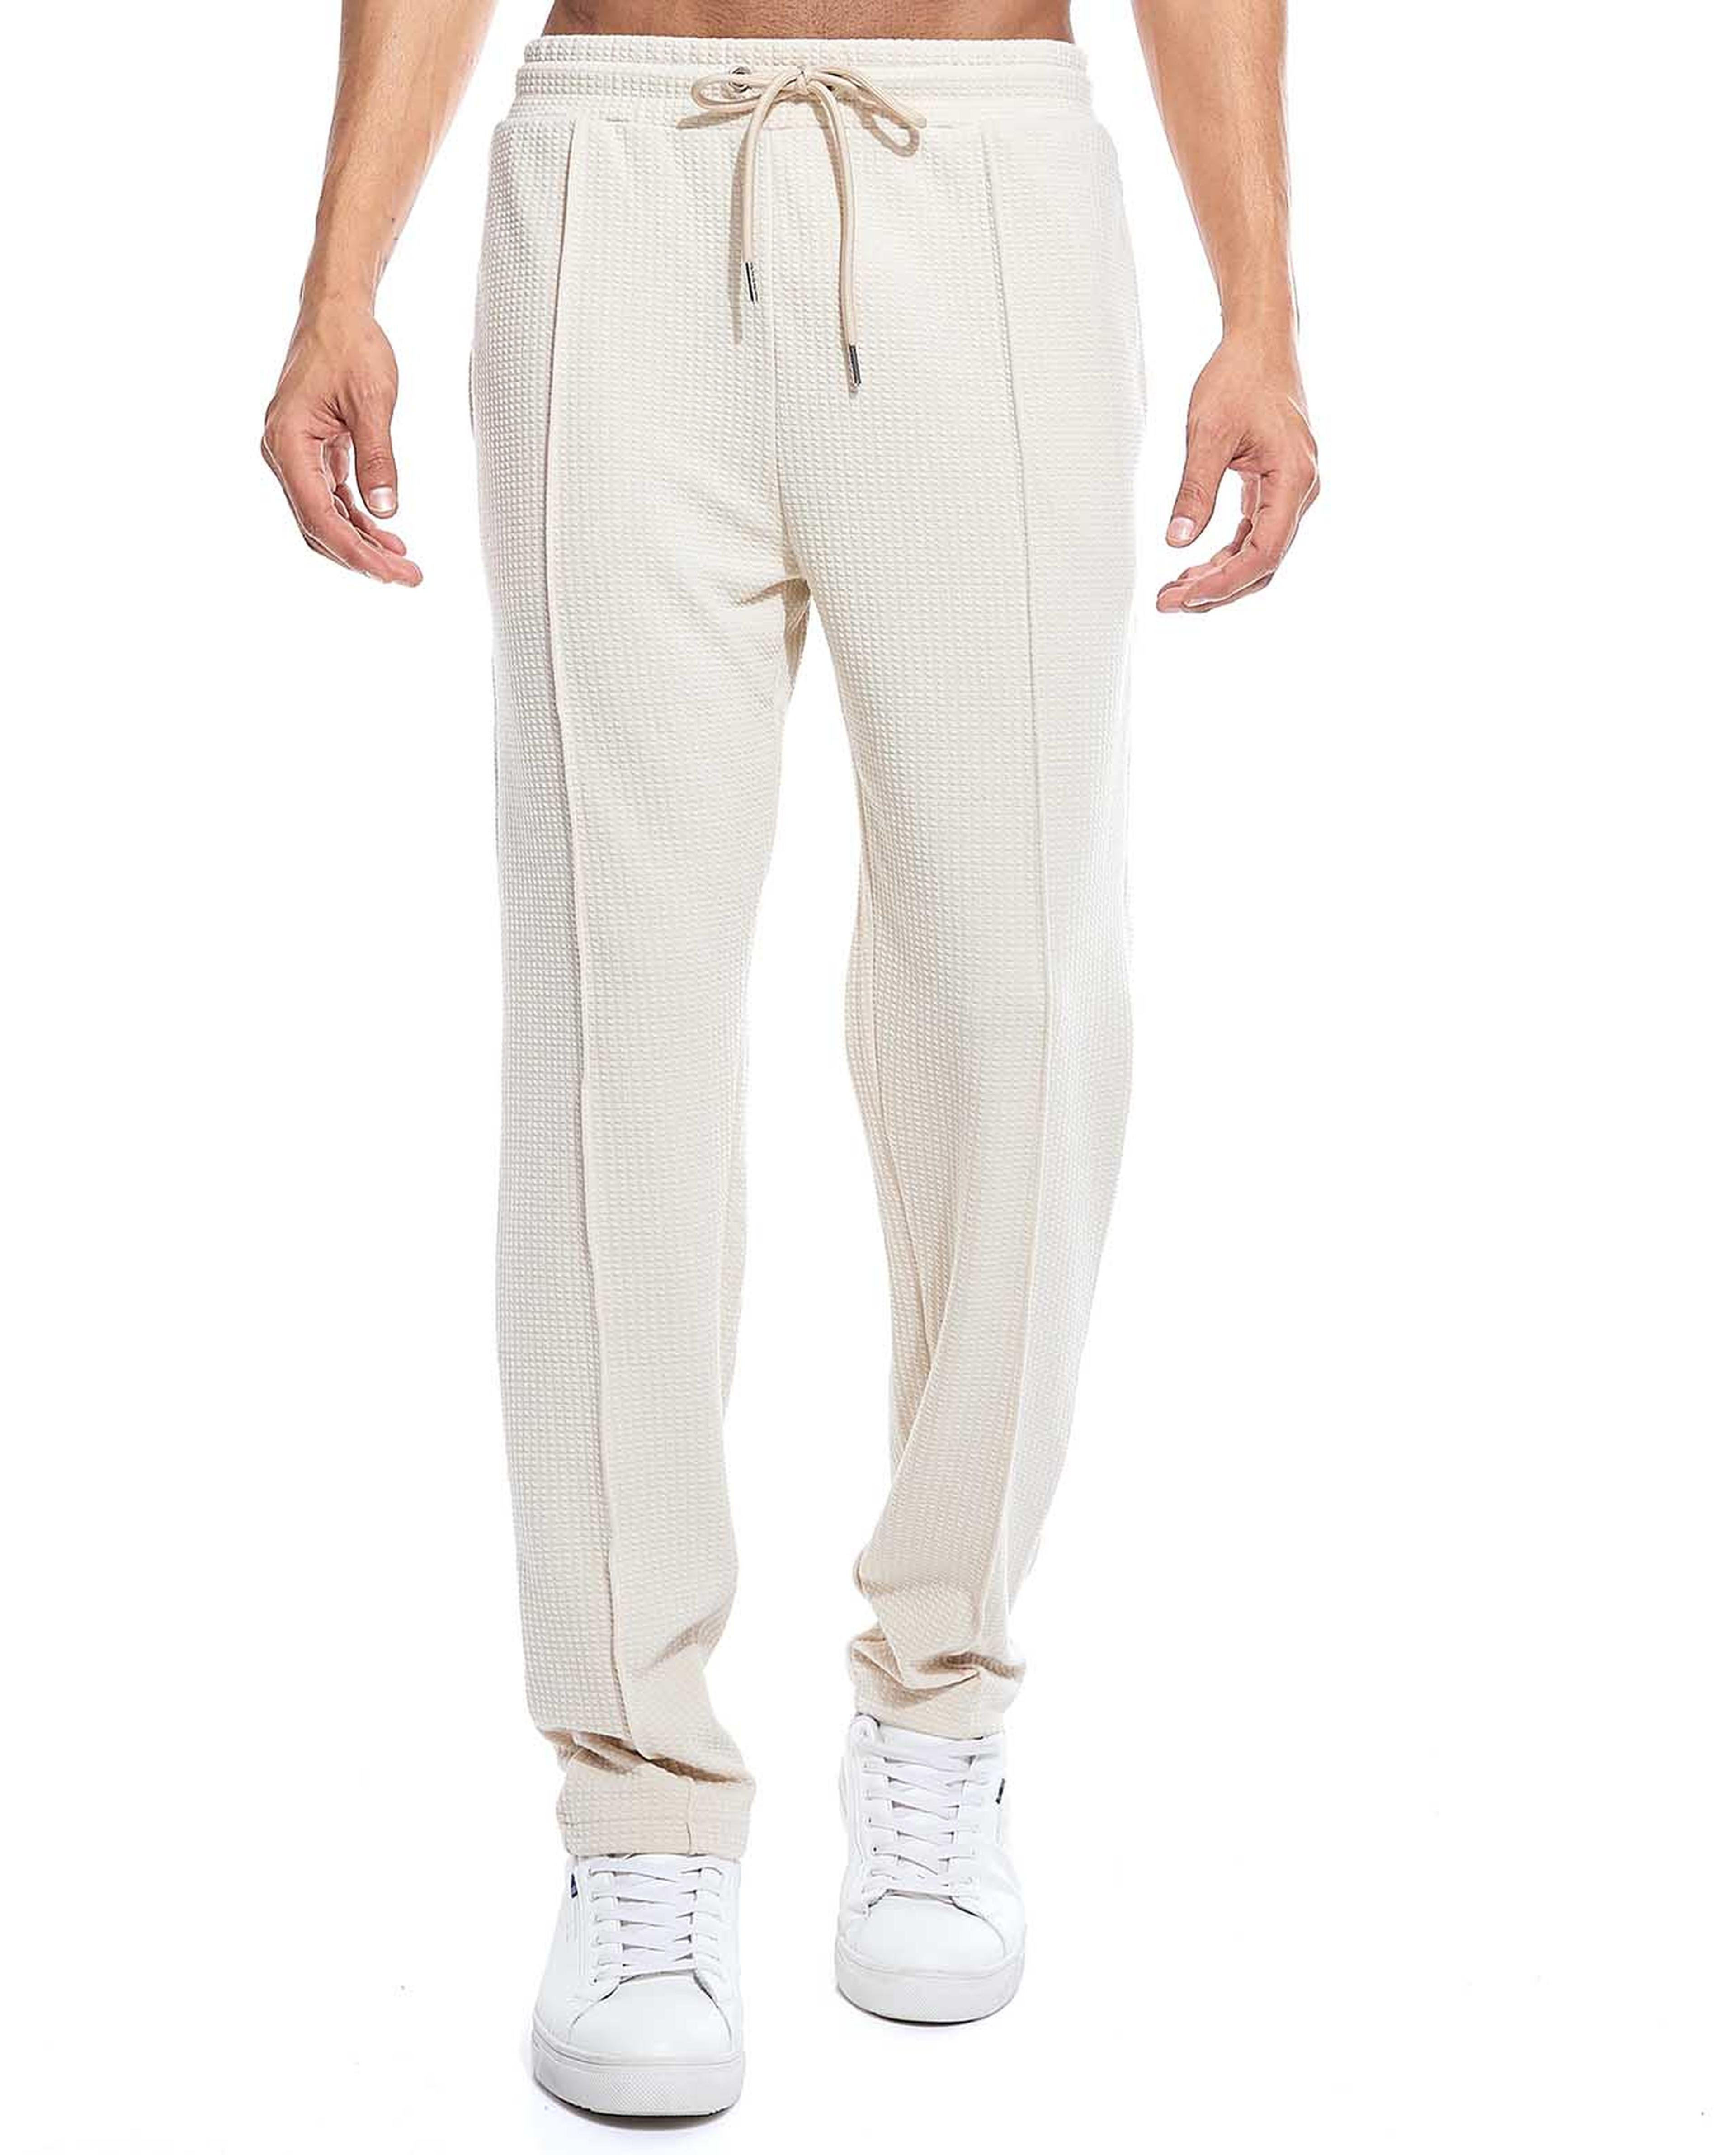 Waffle Textured Pants with Drawstring Waist